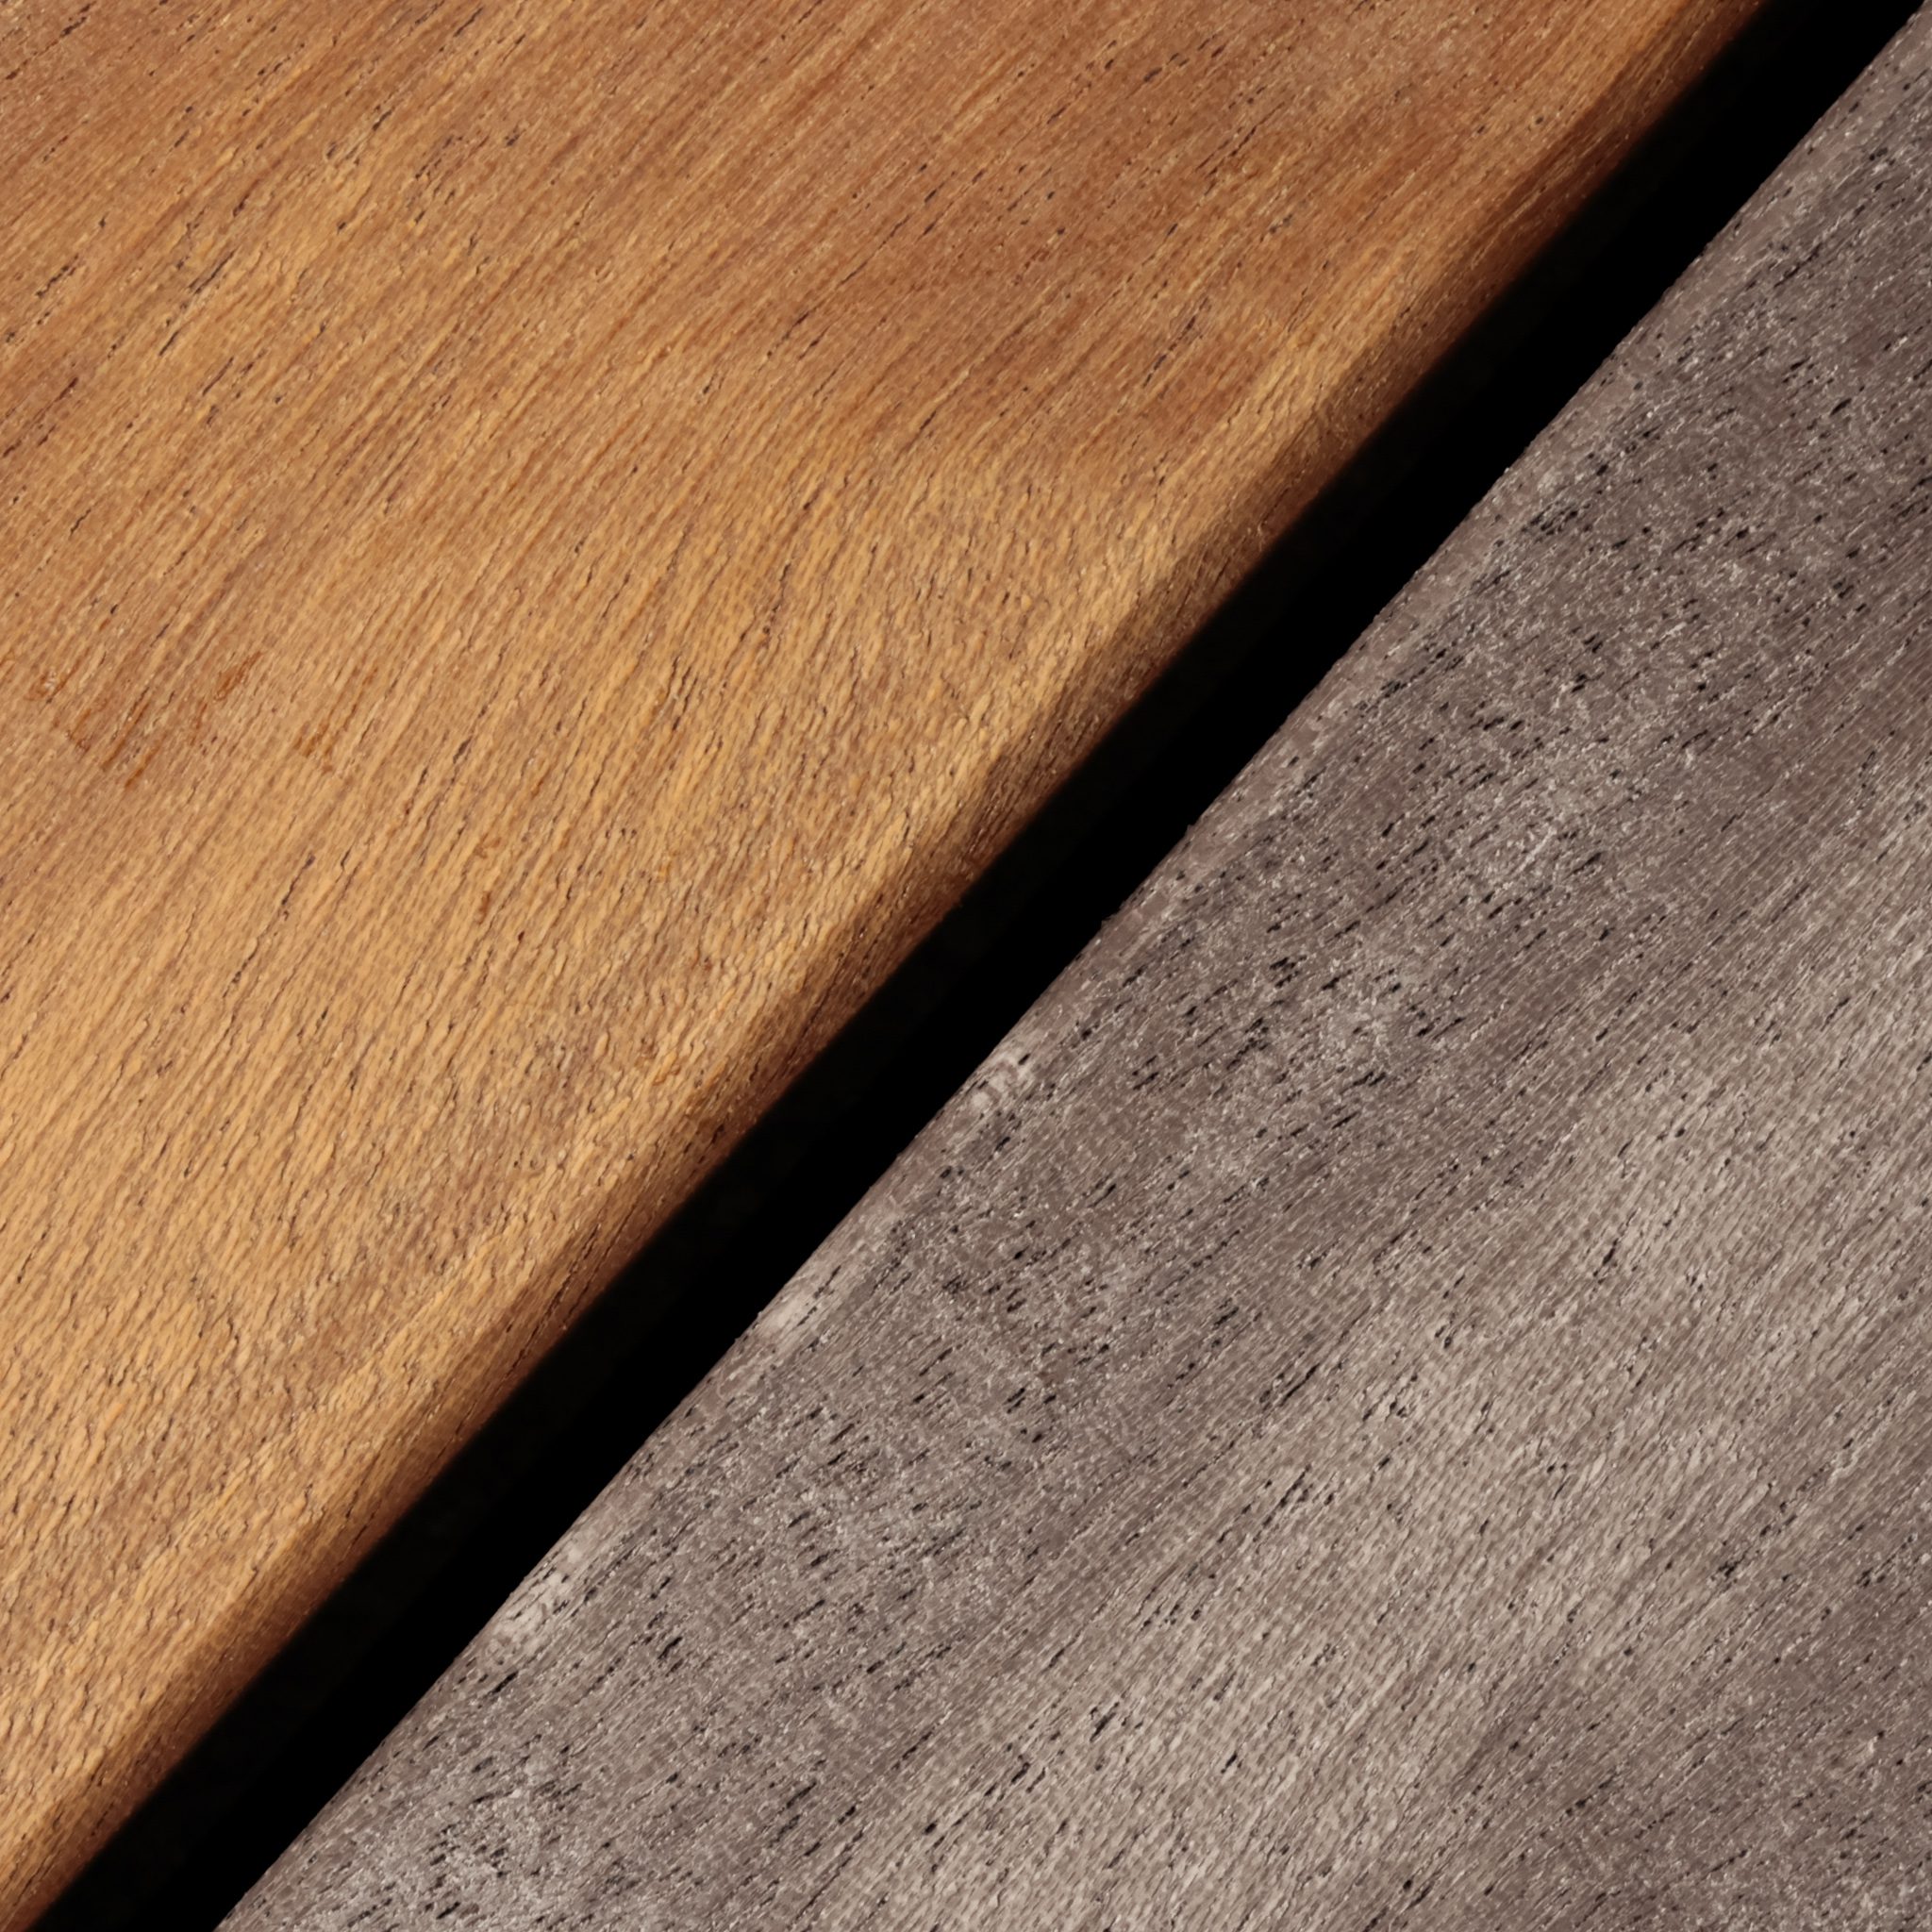 Sapele non-weathered and weathered